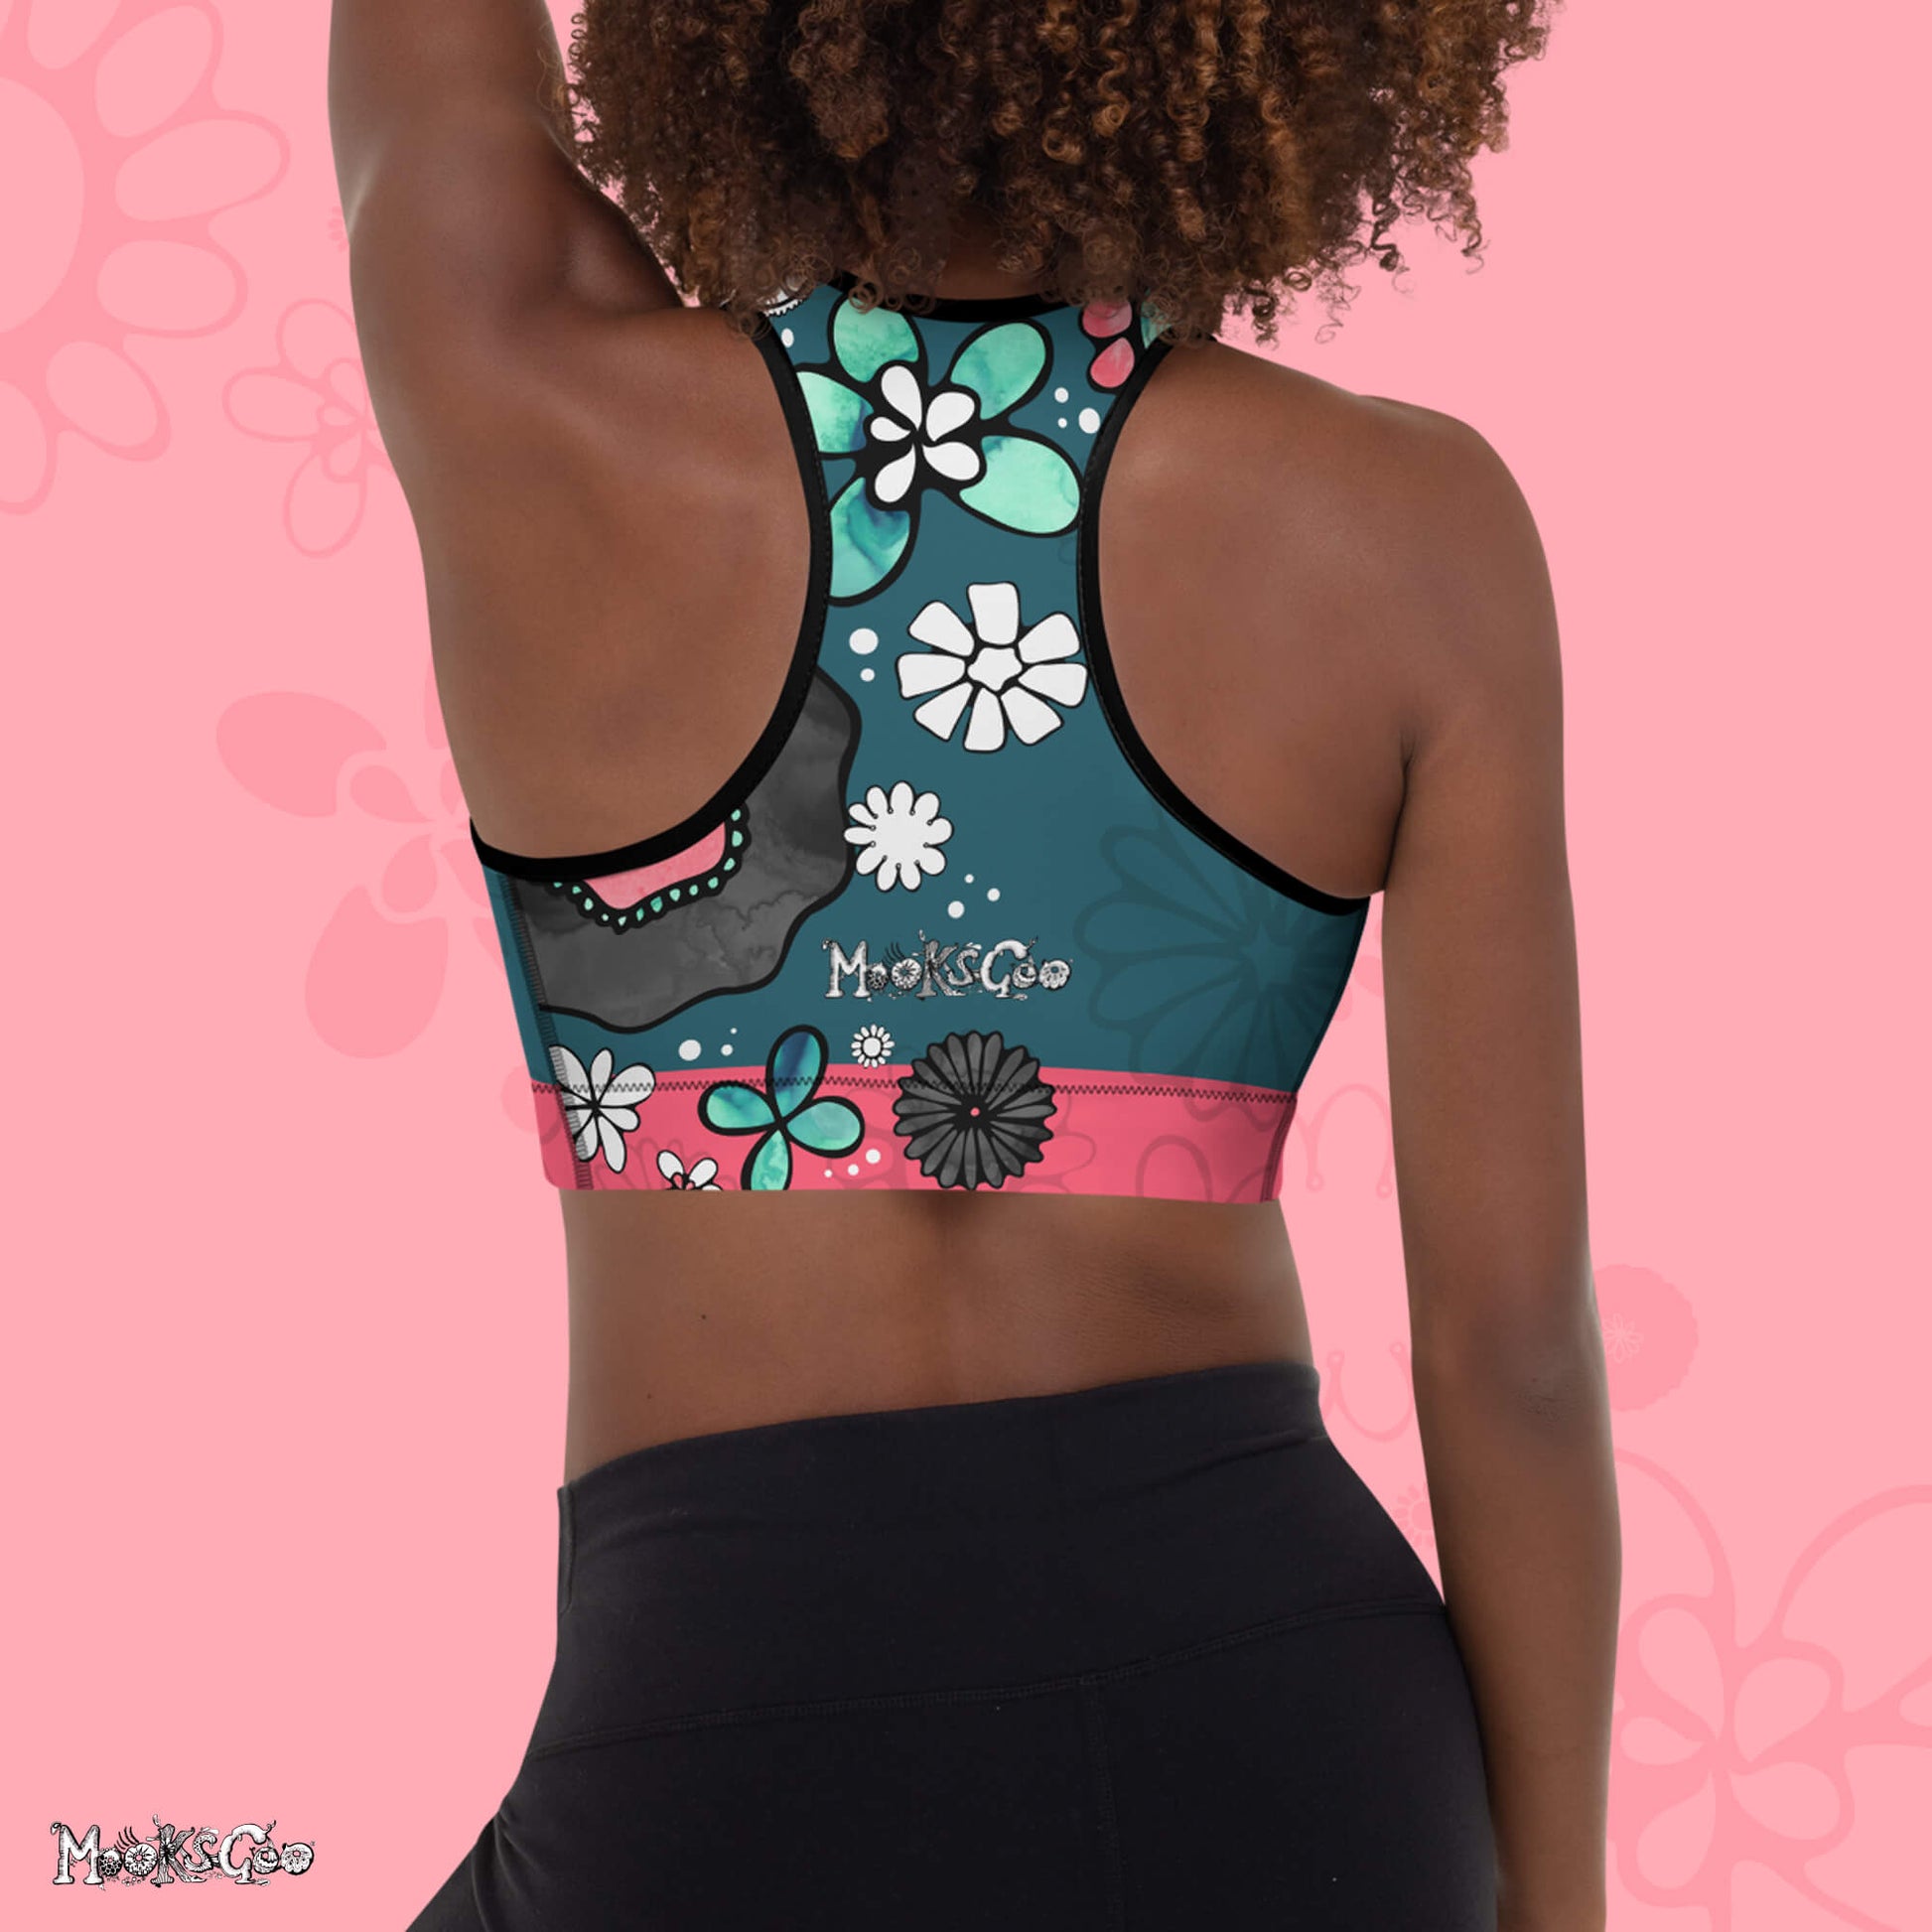 Racer back flower power sports be a with turquoise and pink designs. Created by MooksGoo.